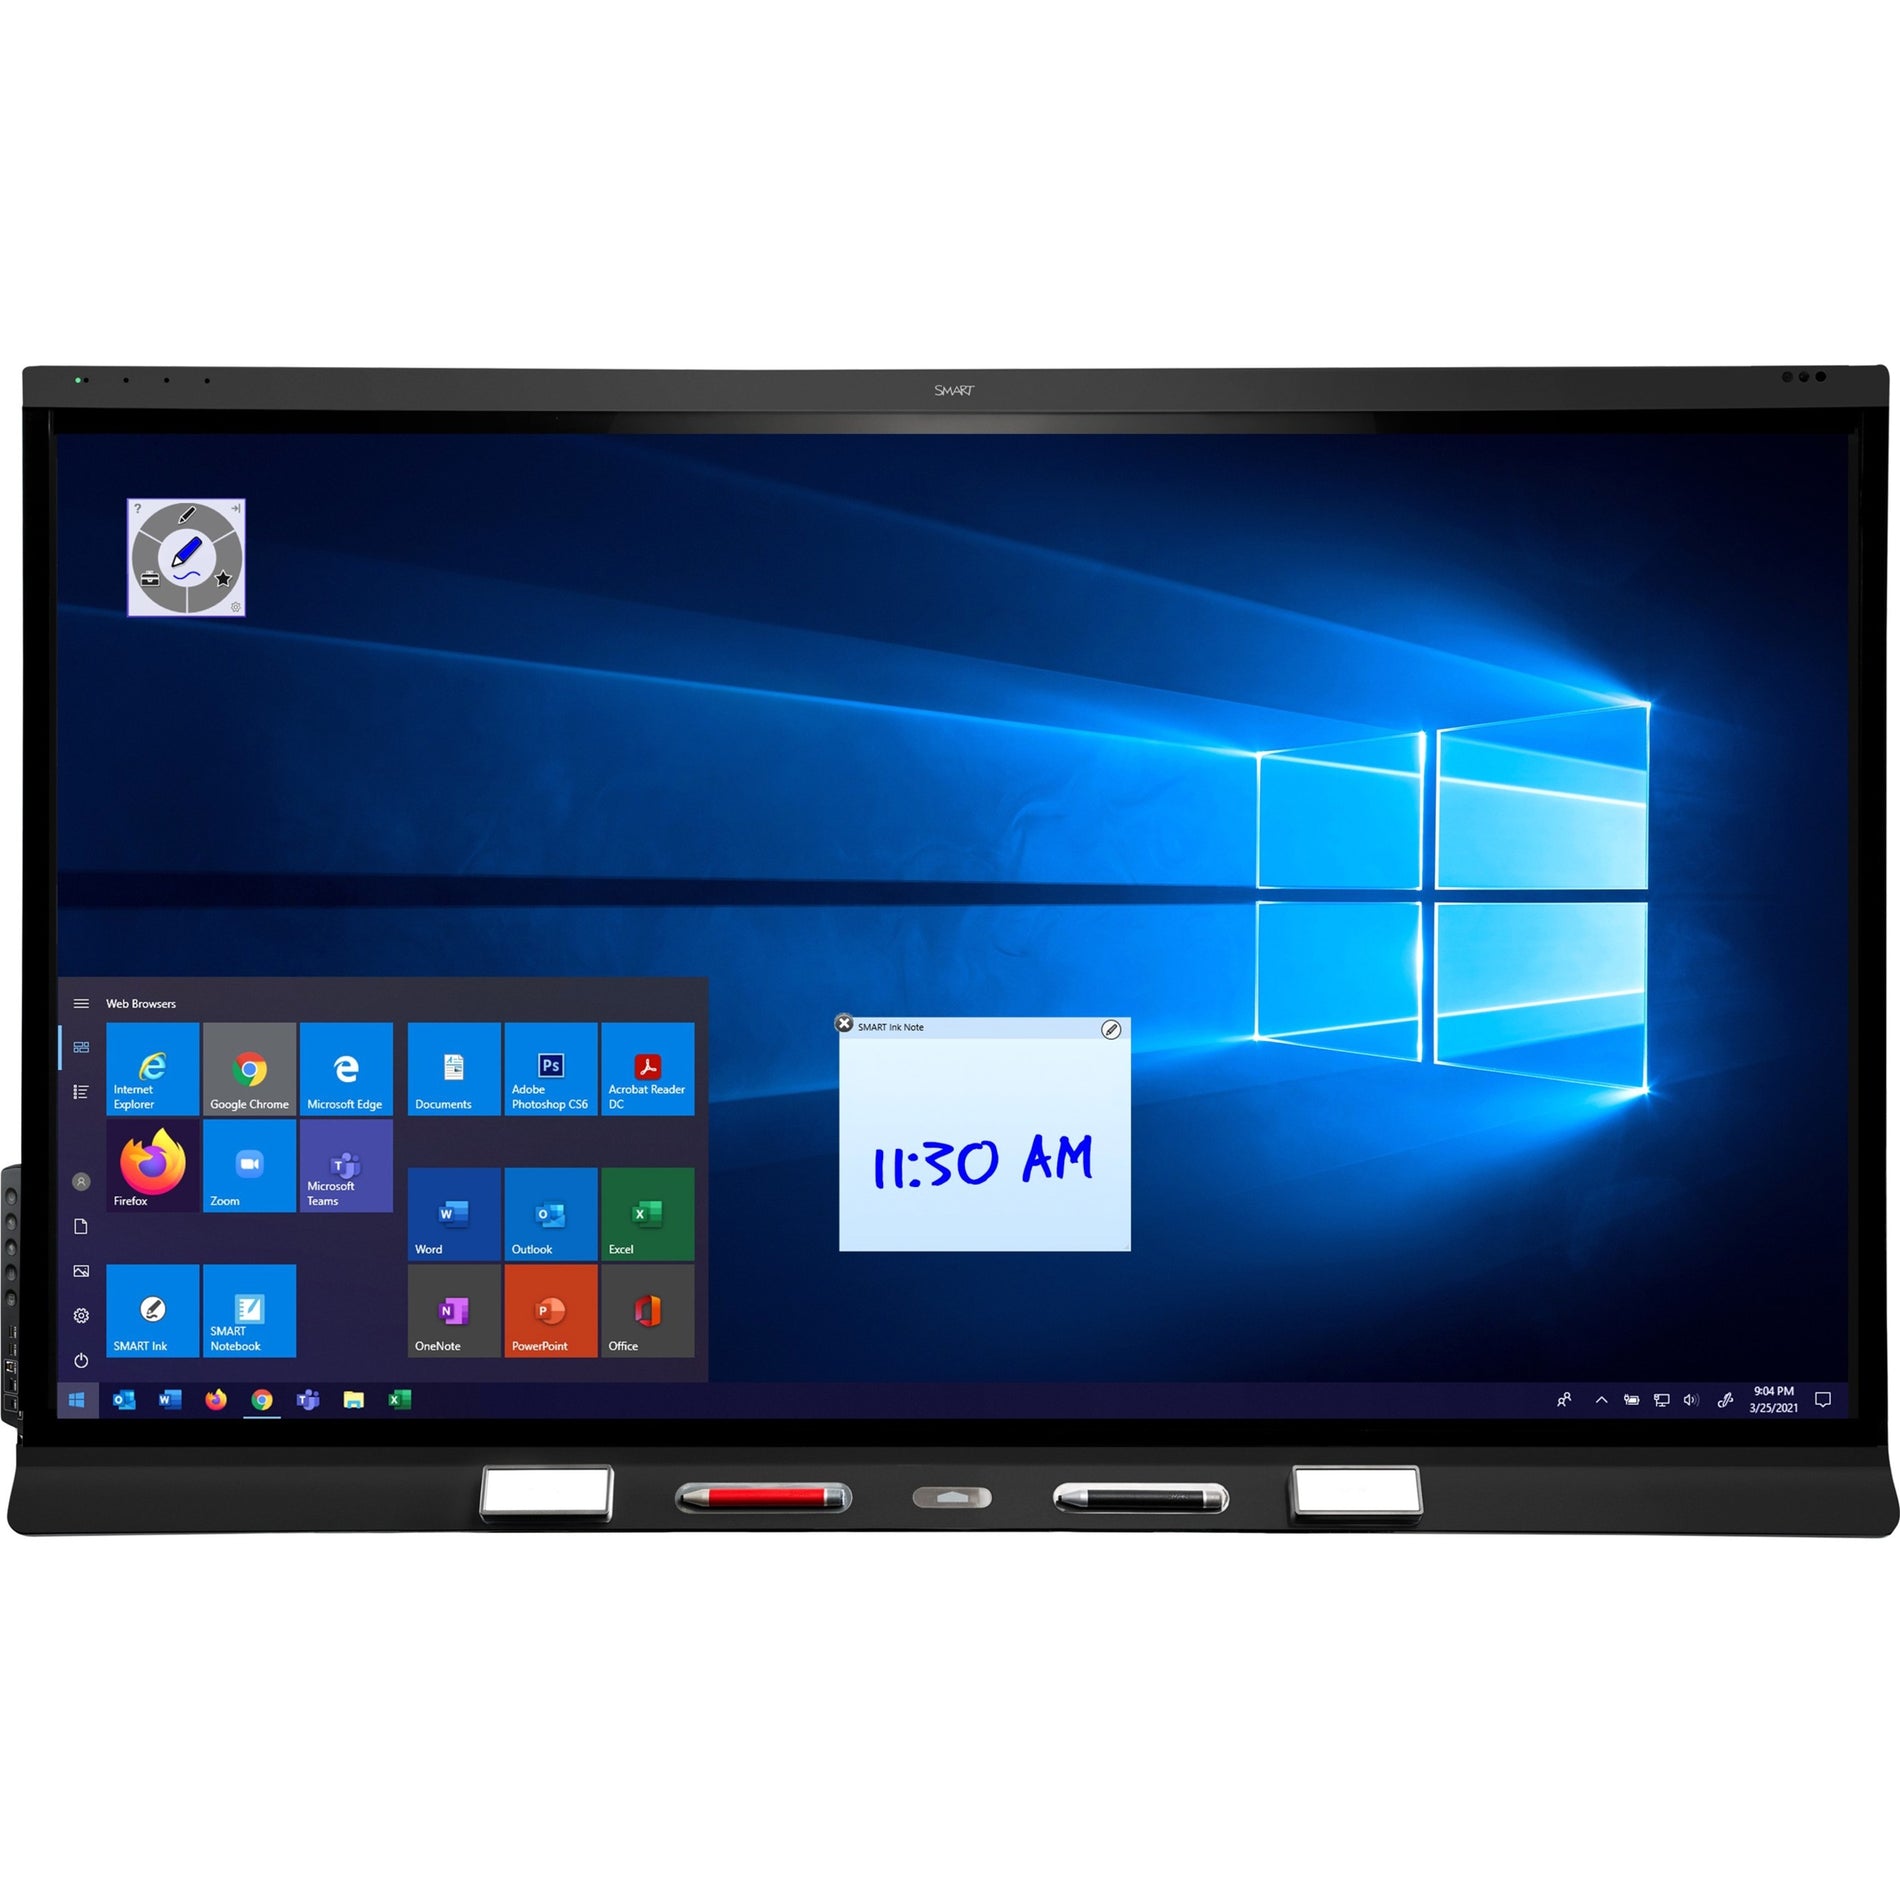 SMART Board SBID-6265S-V3-P 6065S-V3 Pro Interactive Display with iQ, 65" 4K UHD LCD, Android 9.0 Pie, 40W Speakers